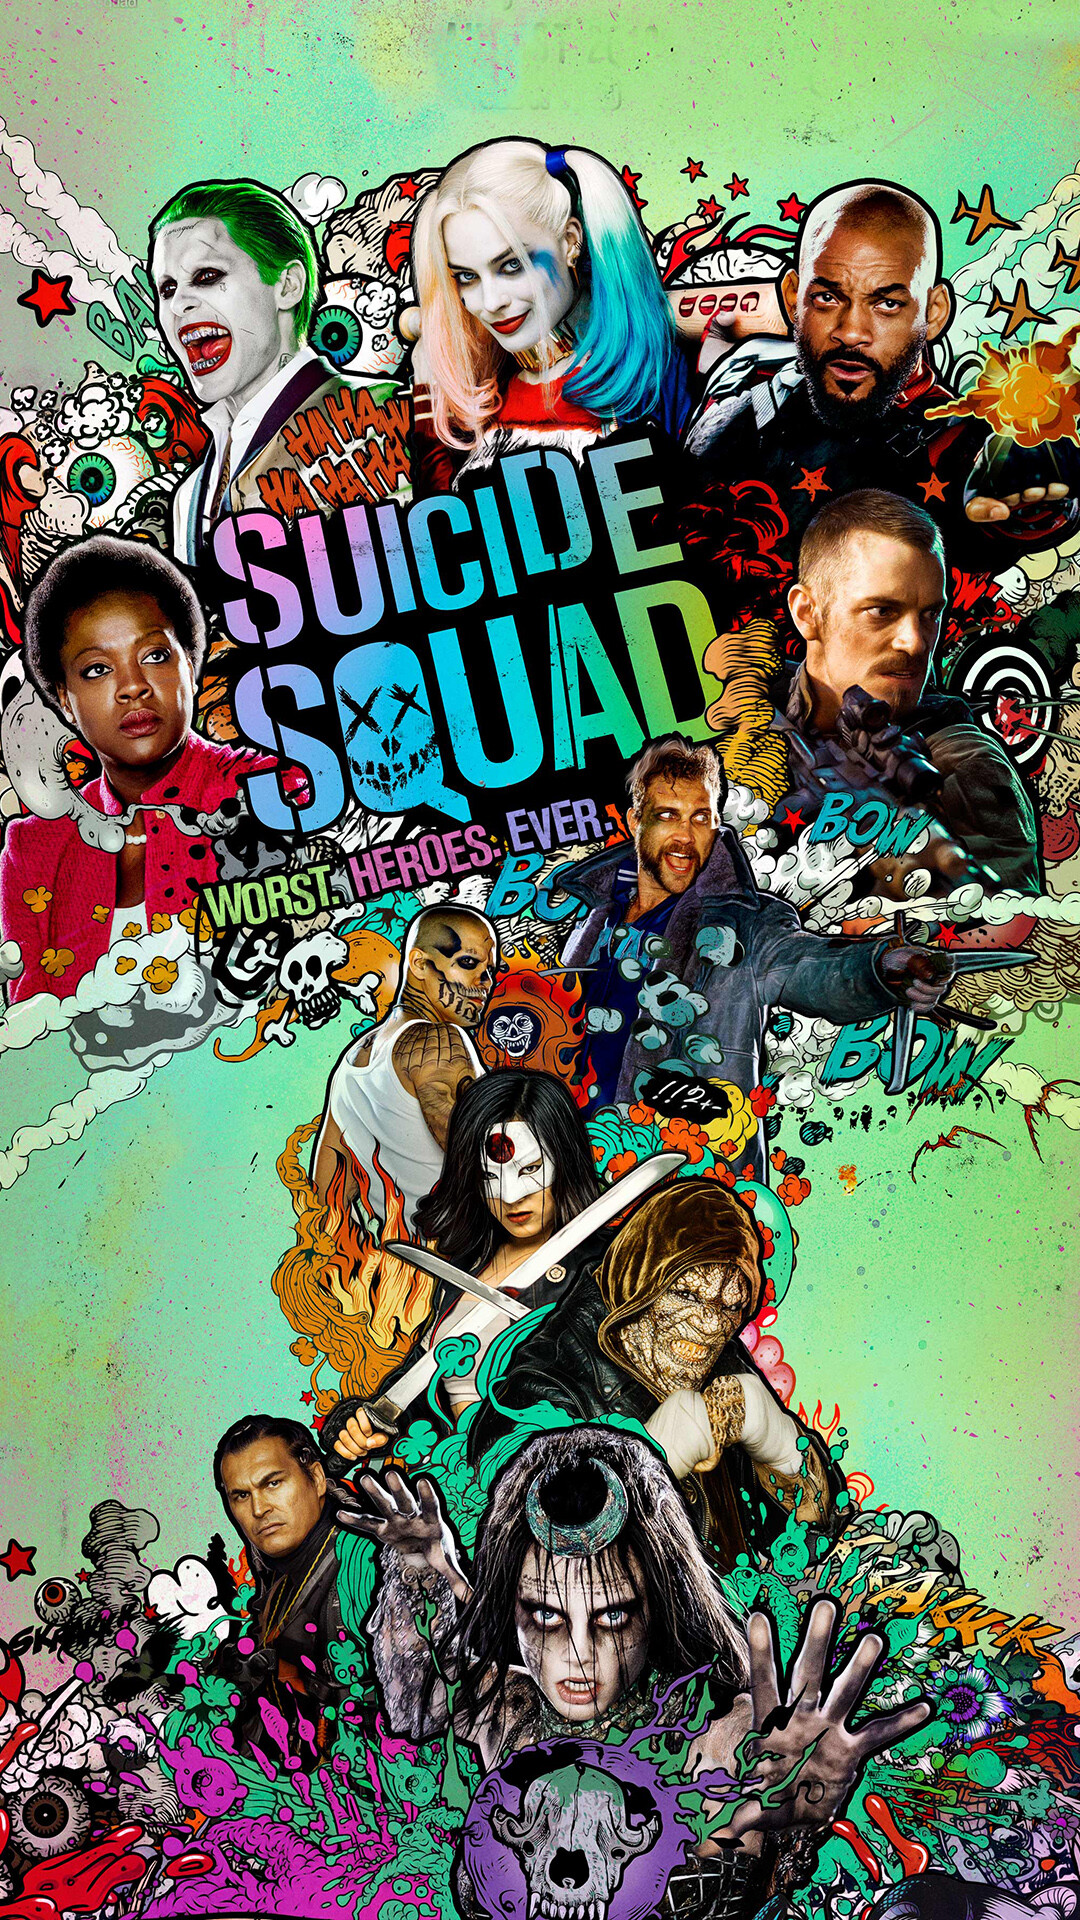 Suicide Squad: Movie poster, DC film, Superheroes. 1080x1920 Full HD Wallpaper.